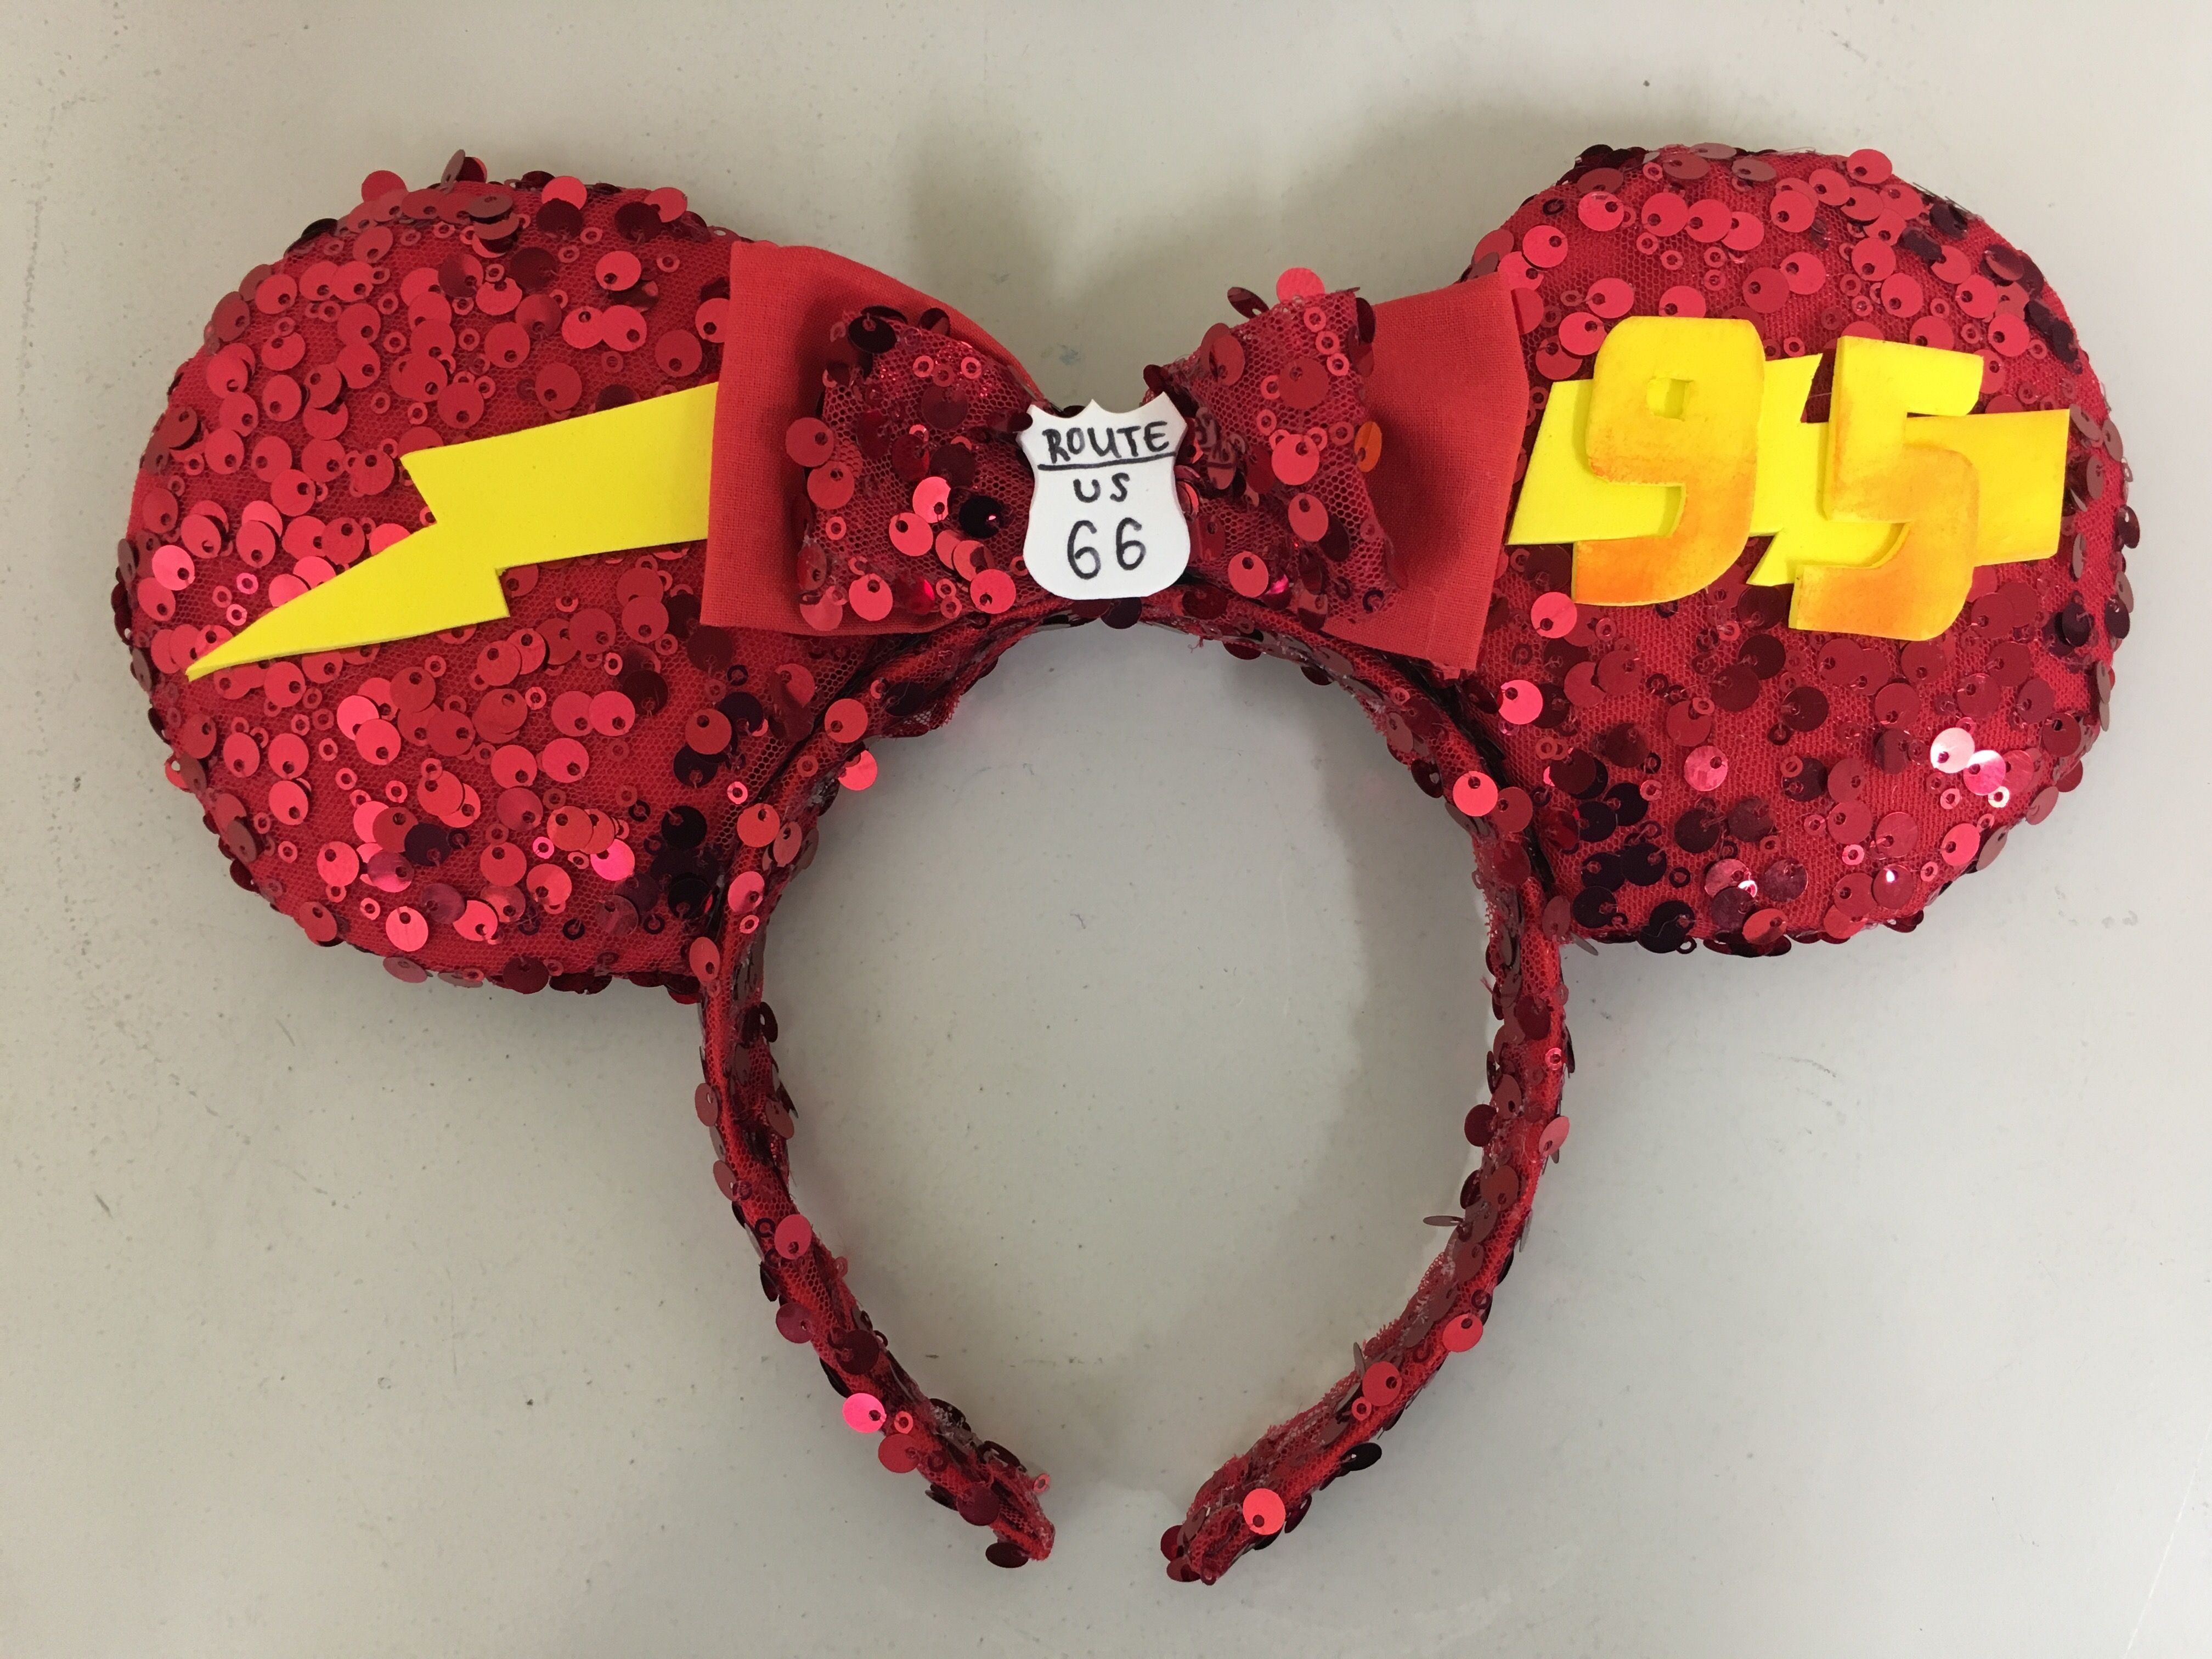 Ka-chow! These ears are one of a kind. Such a fun addition to any ...